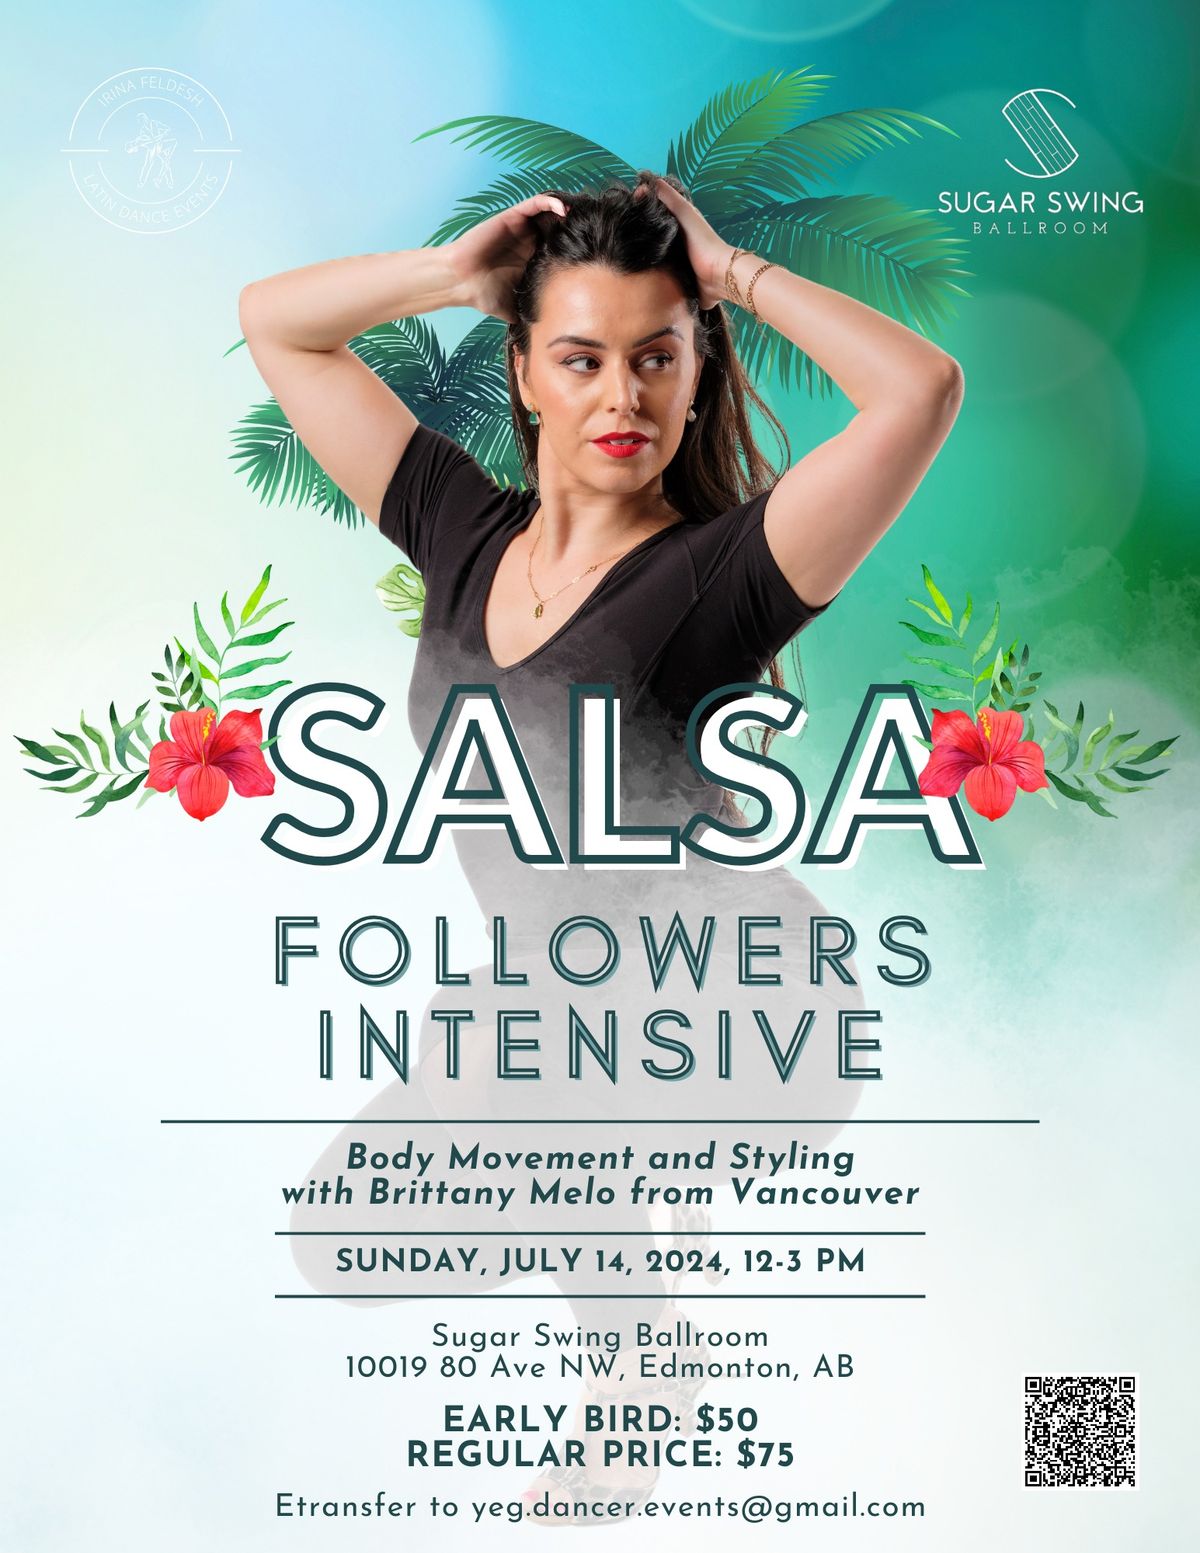 Salsa Dance Workshops with Brittany Melo from Vancouver - July 14, 2024